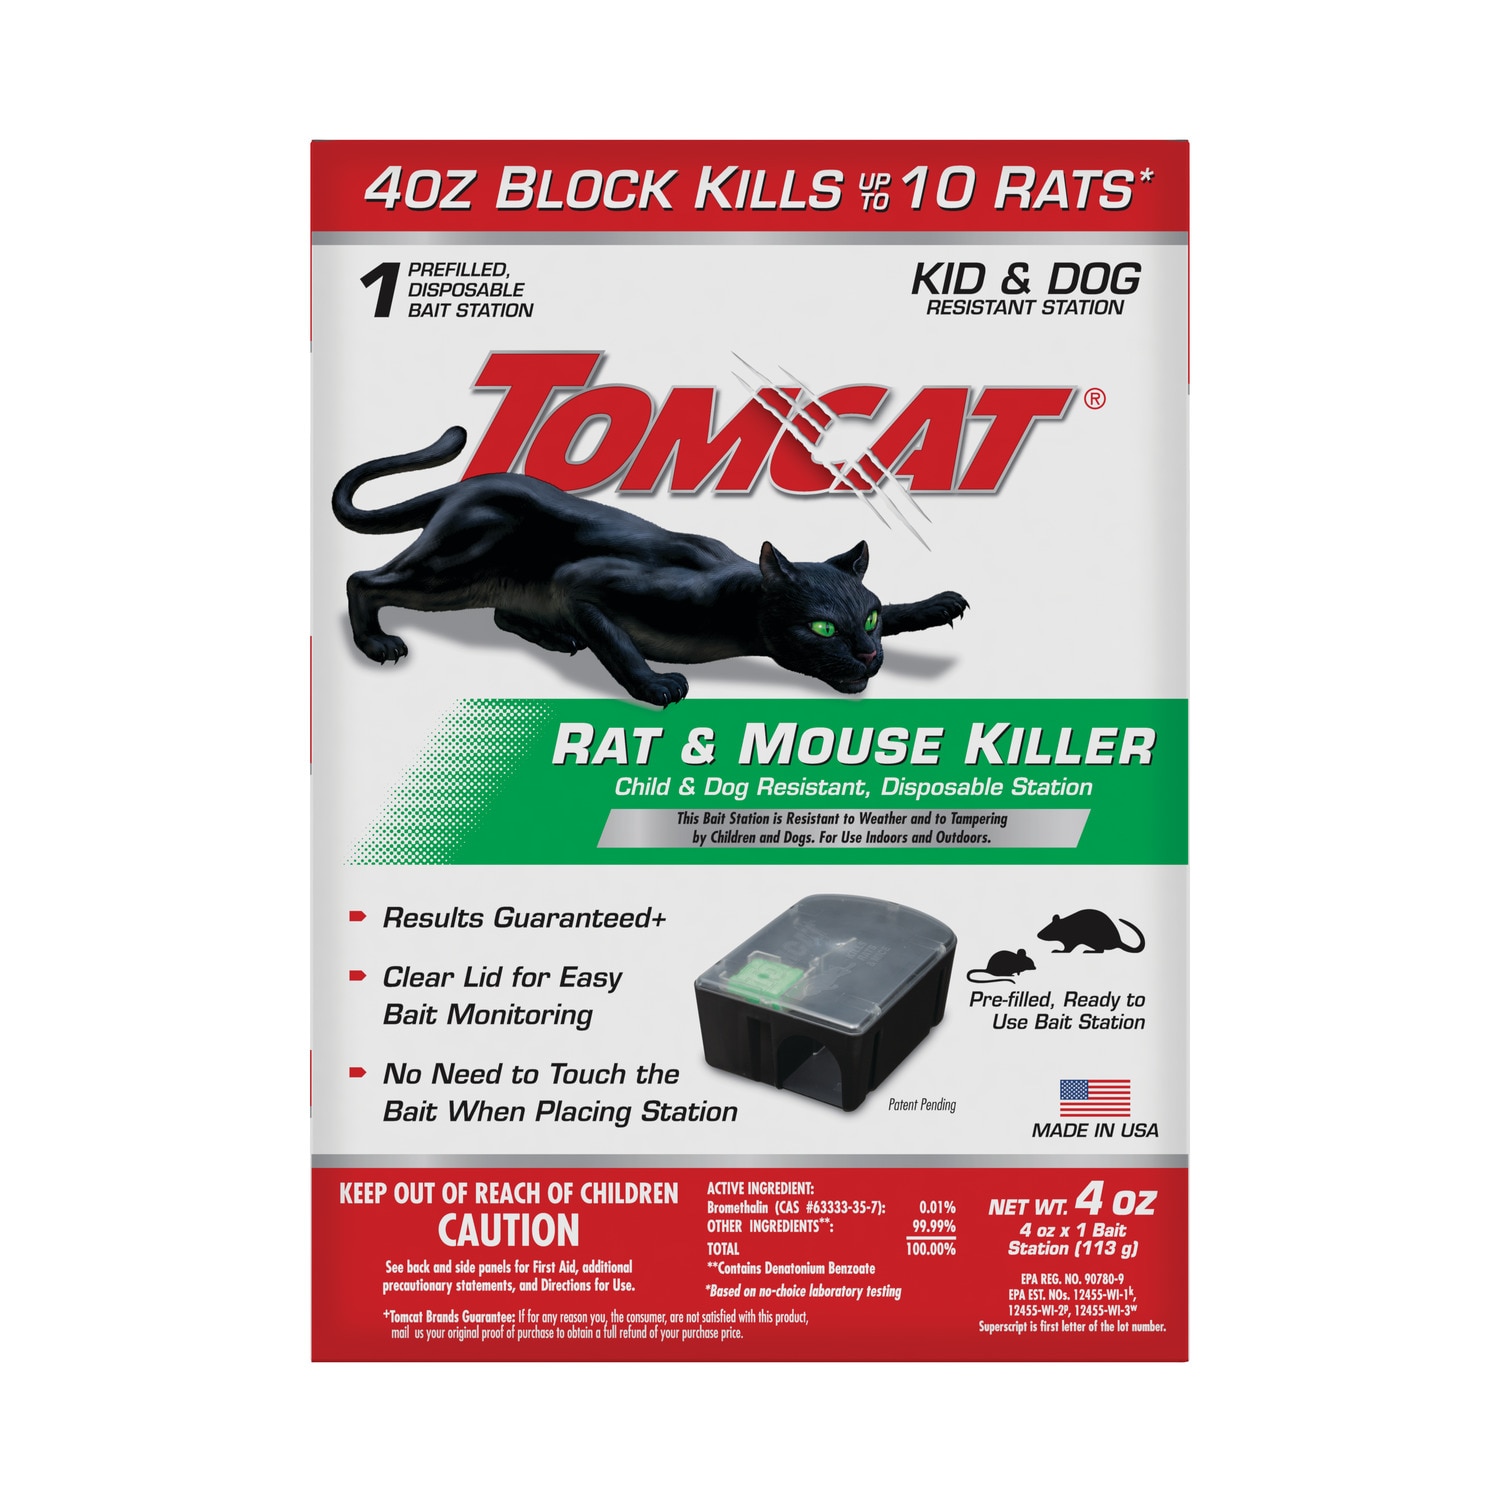 TOMCAT Child and Dog Resistant, Disposable Station Rat Killer in